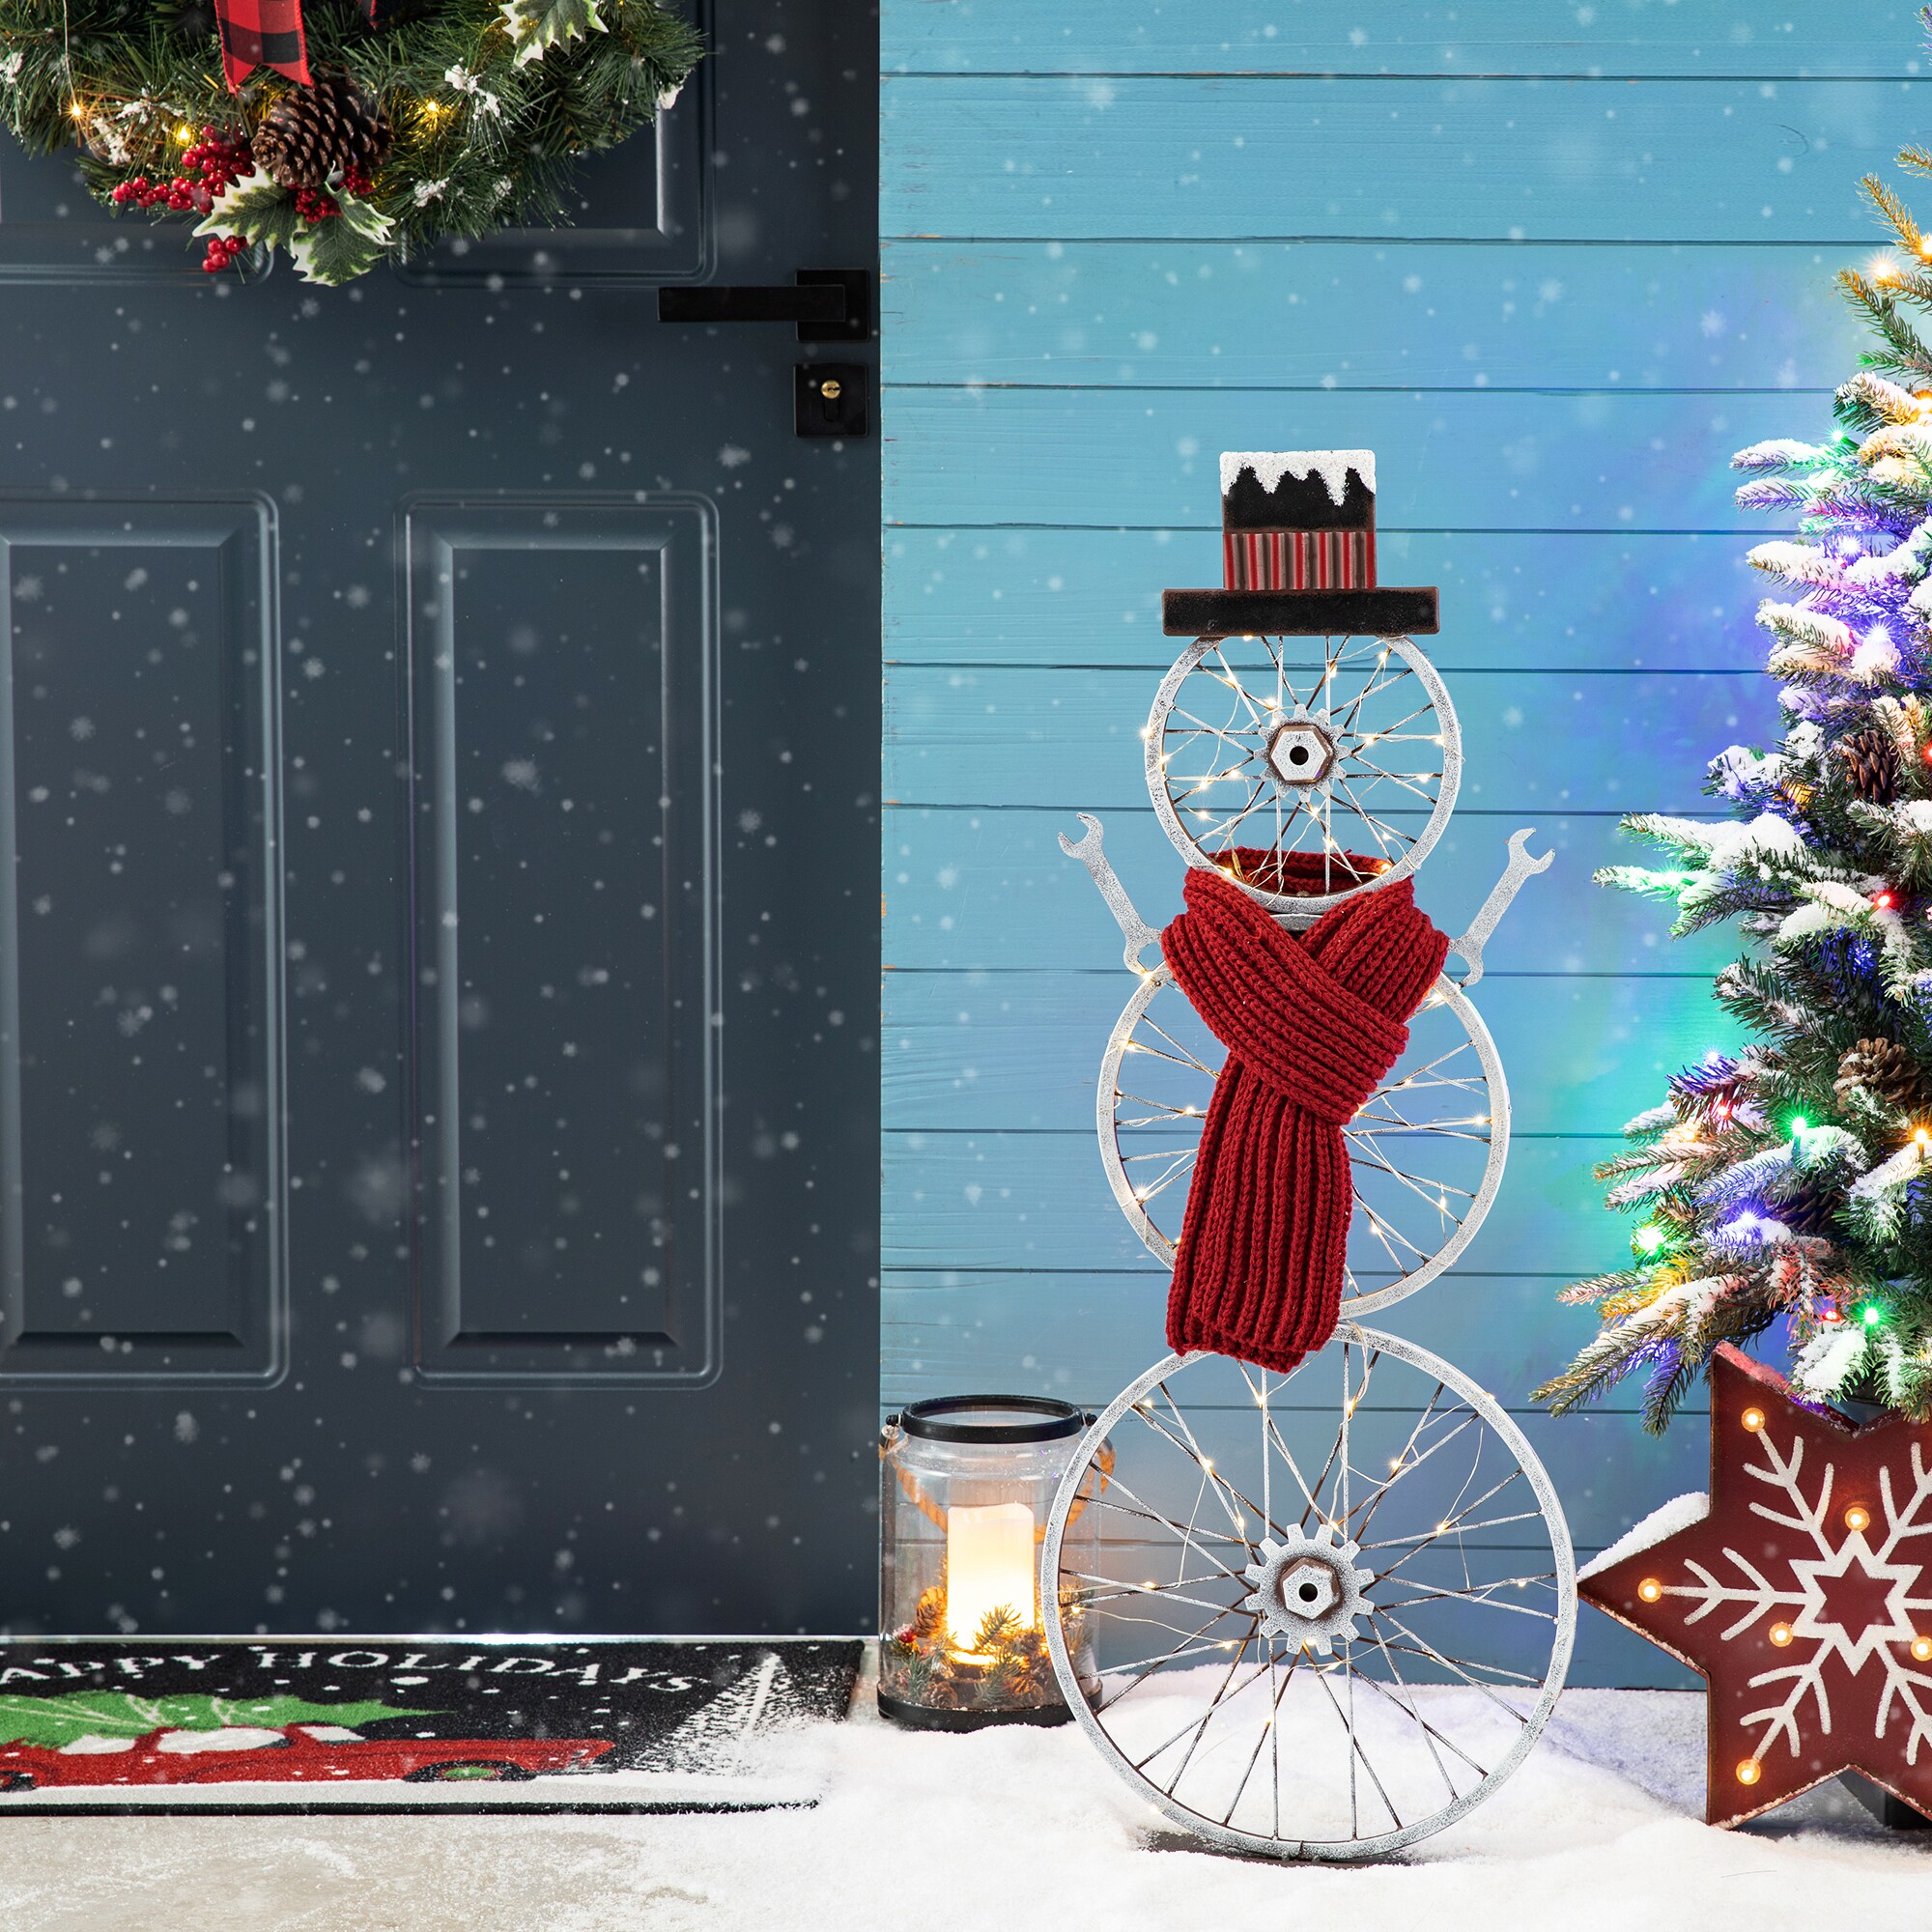 Snowman Lighted Outdoor Christmas Decorations at Lowes.com